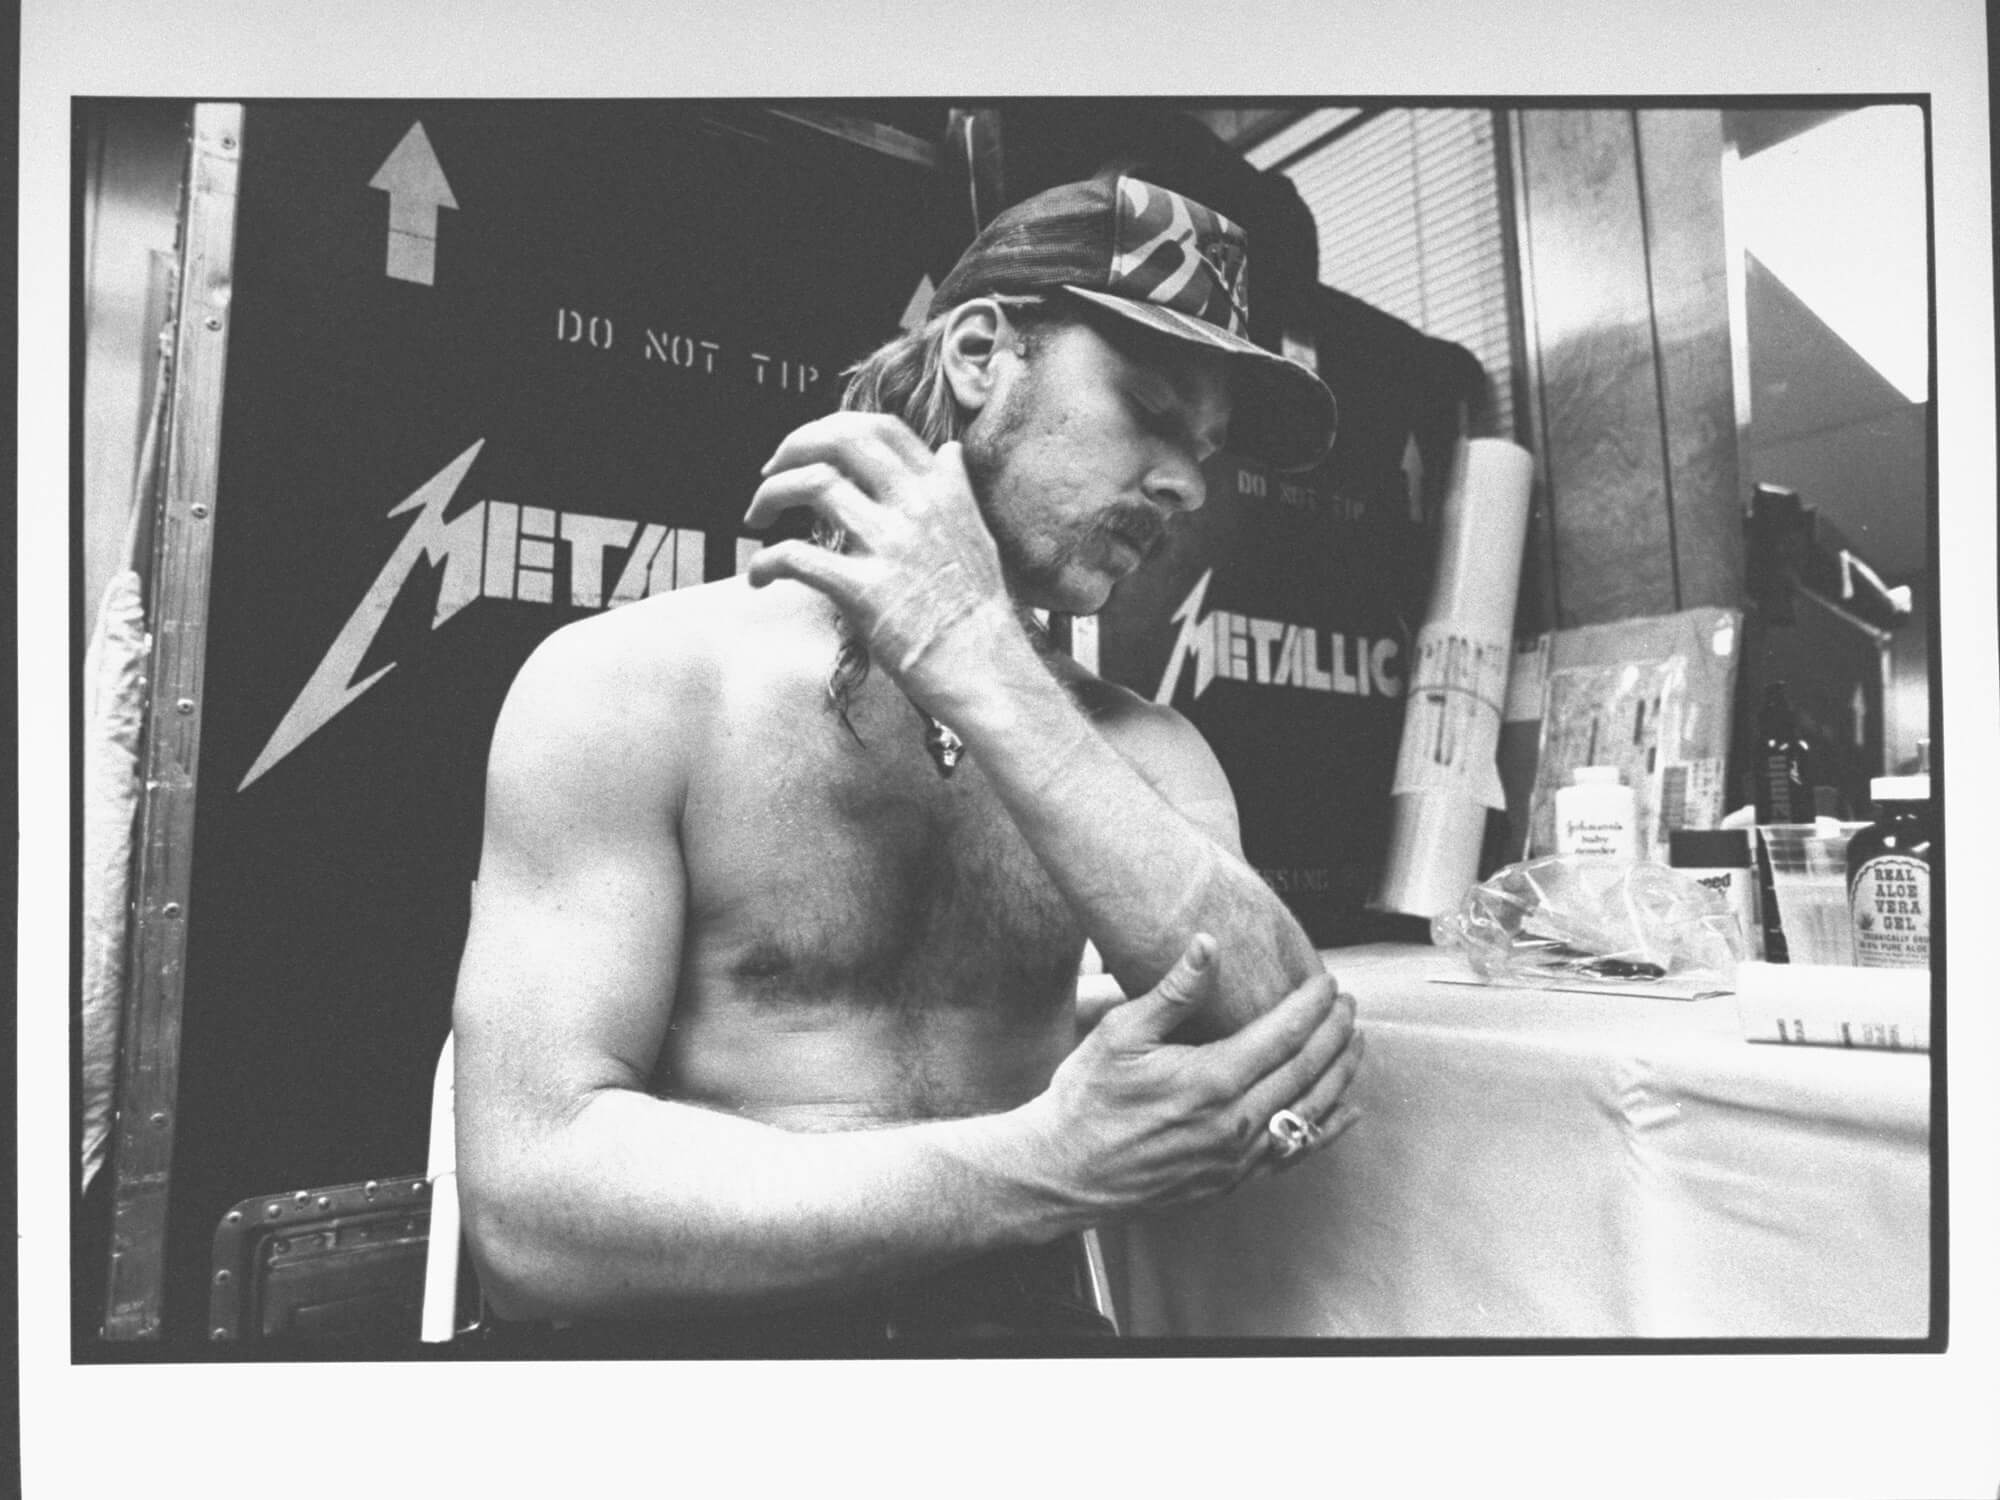 James Hetfield taking care of his burns following pyro incident. He is sitting and rubbing a gel on his arm. The photo is in black and white.